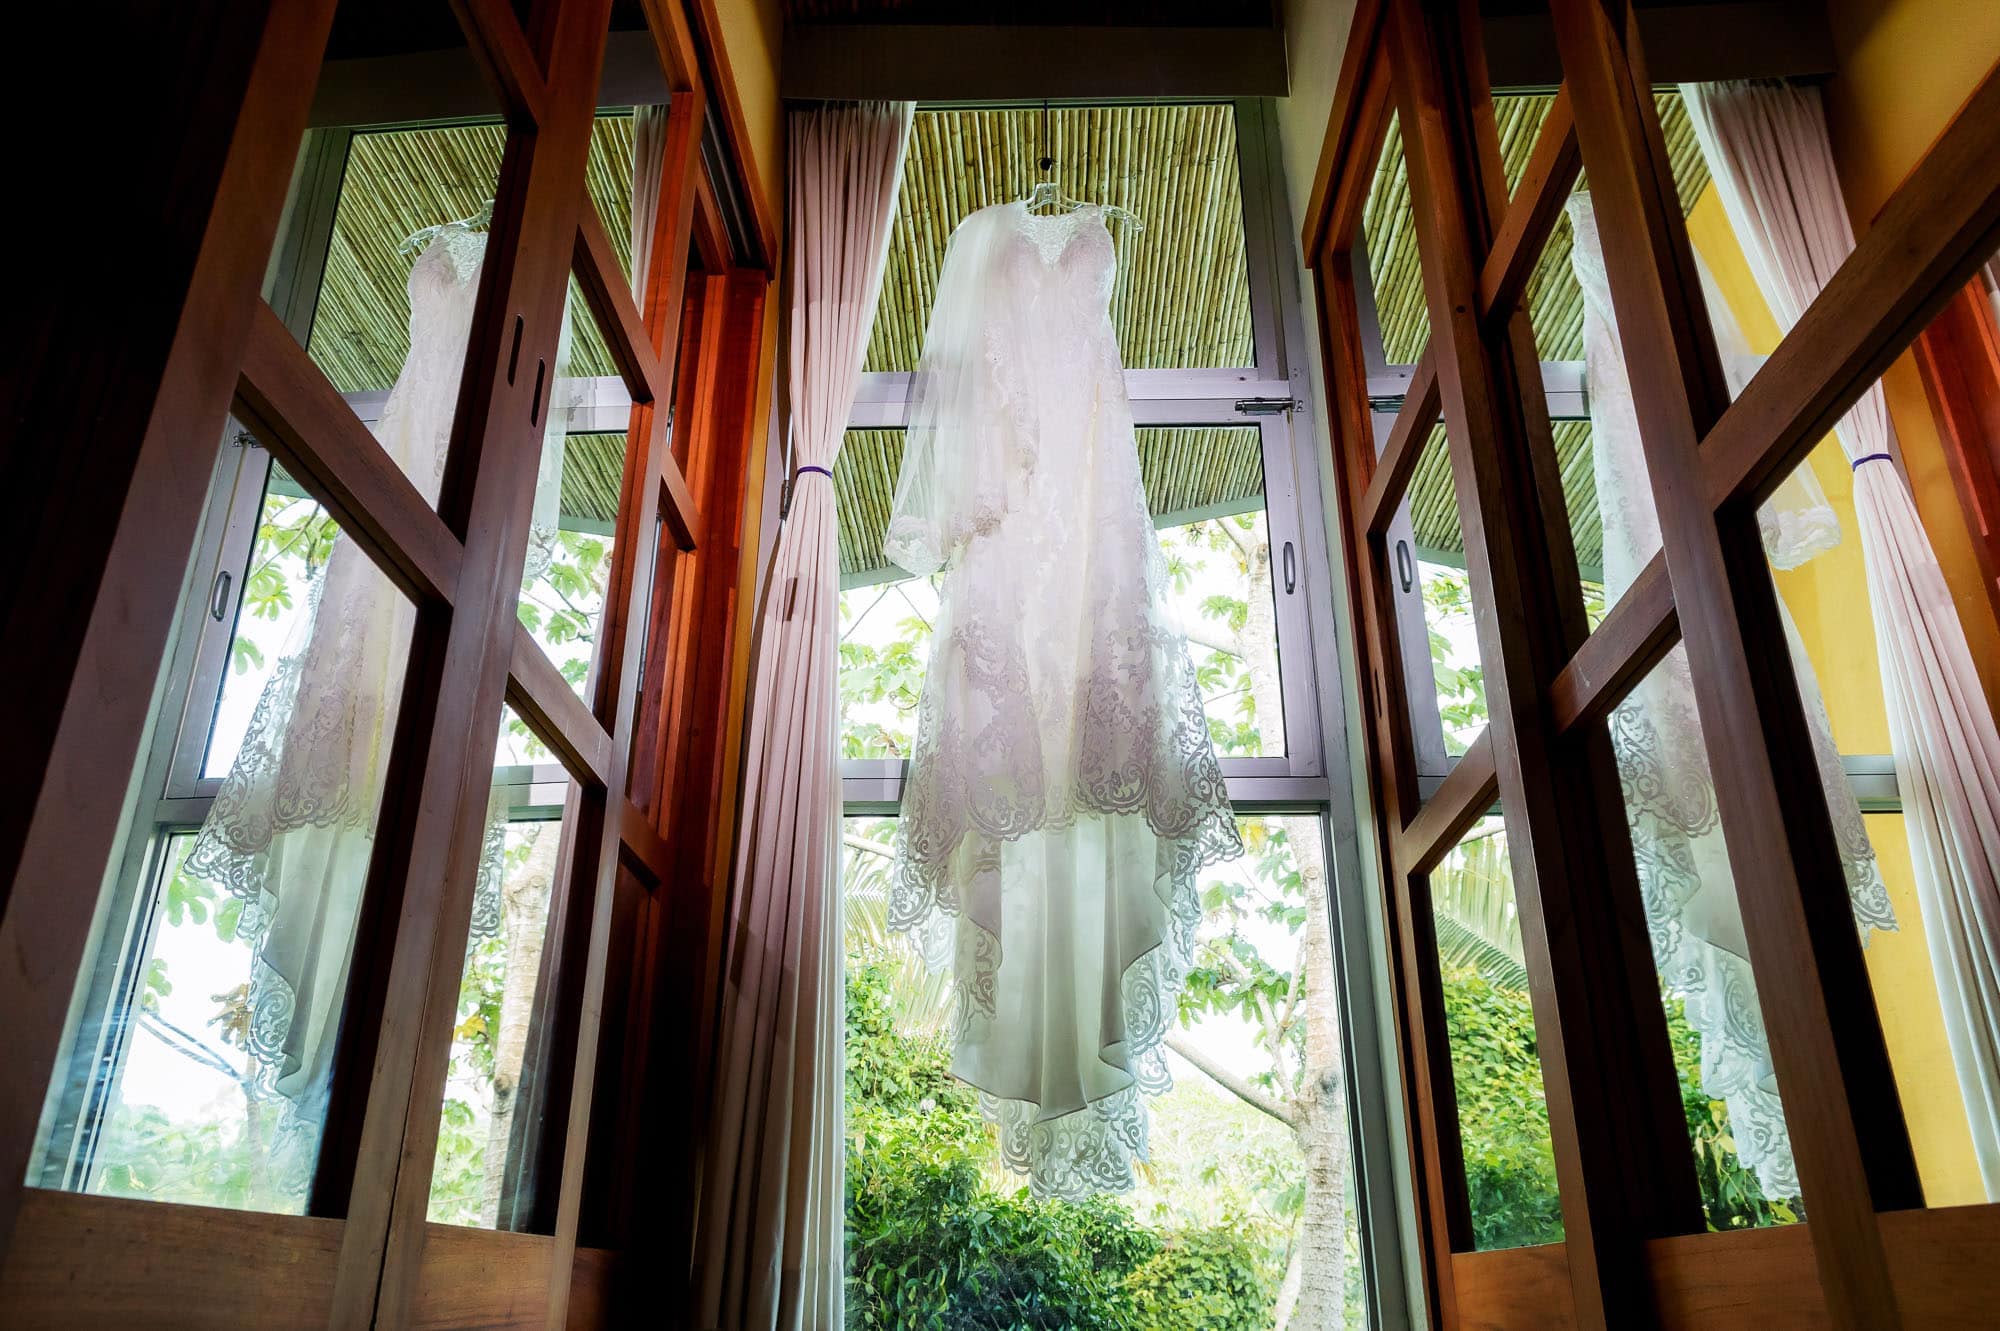 The wedding dress hanging in the window